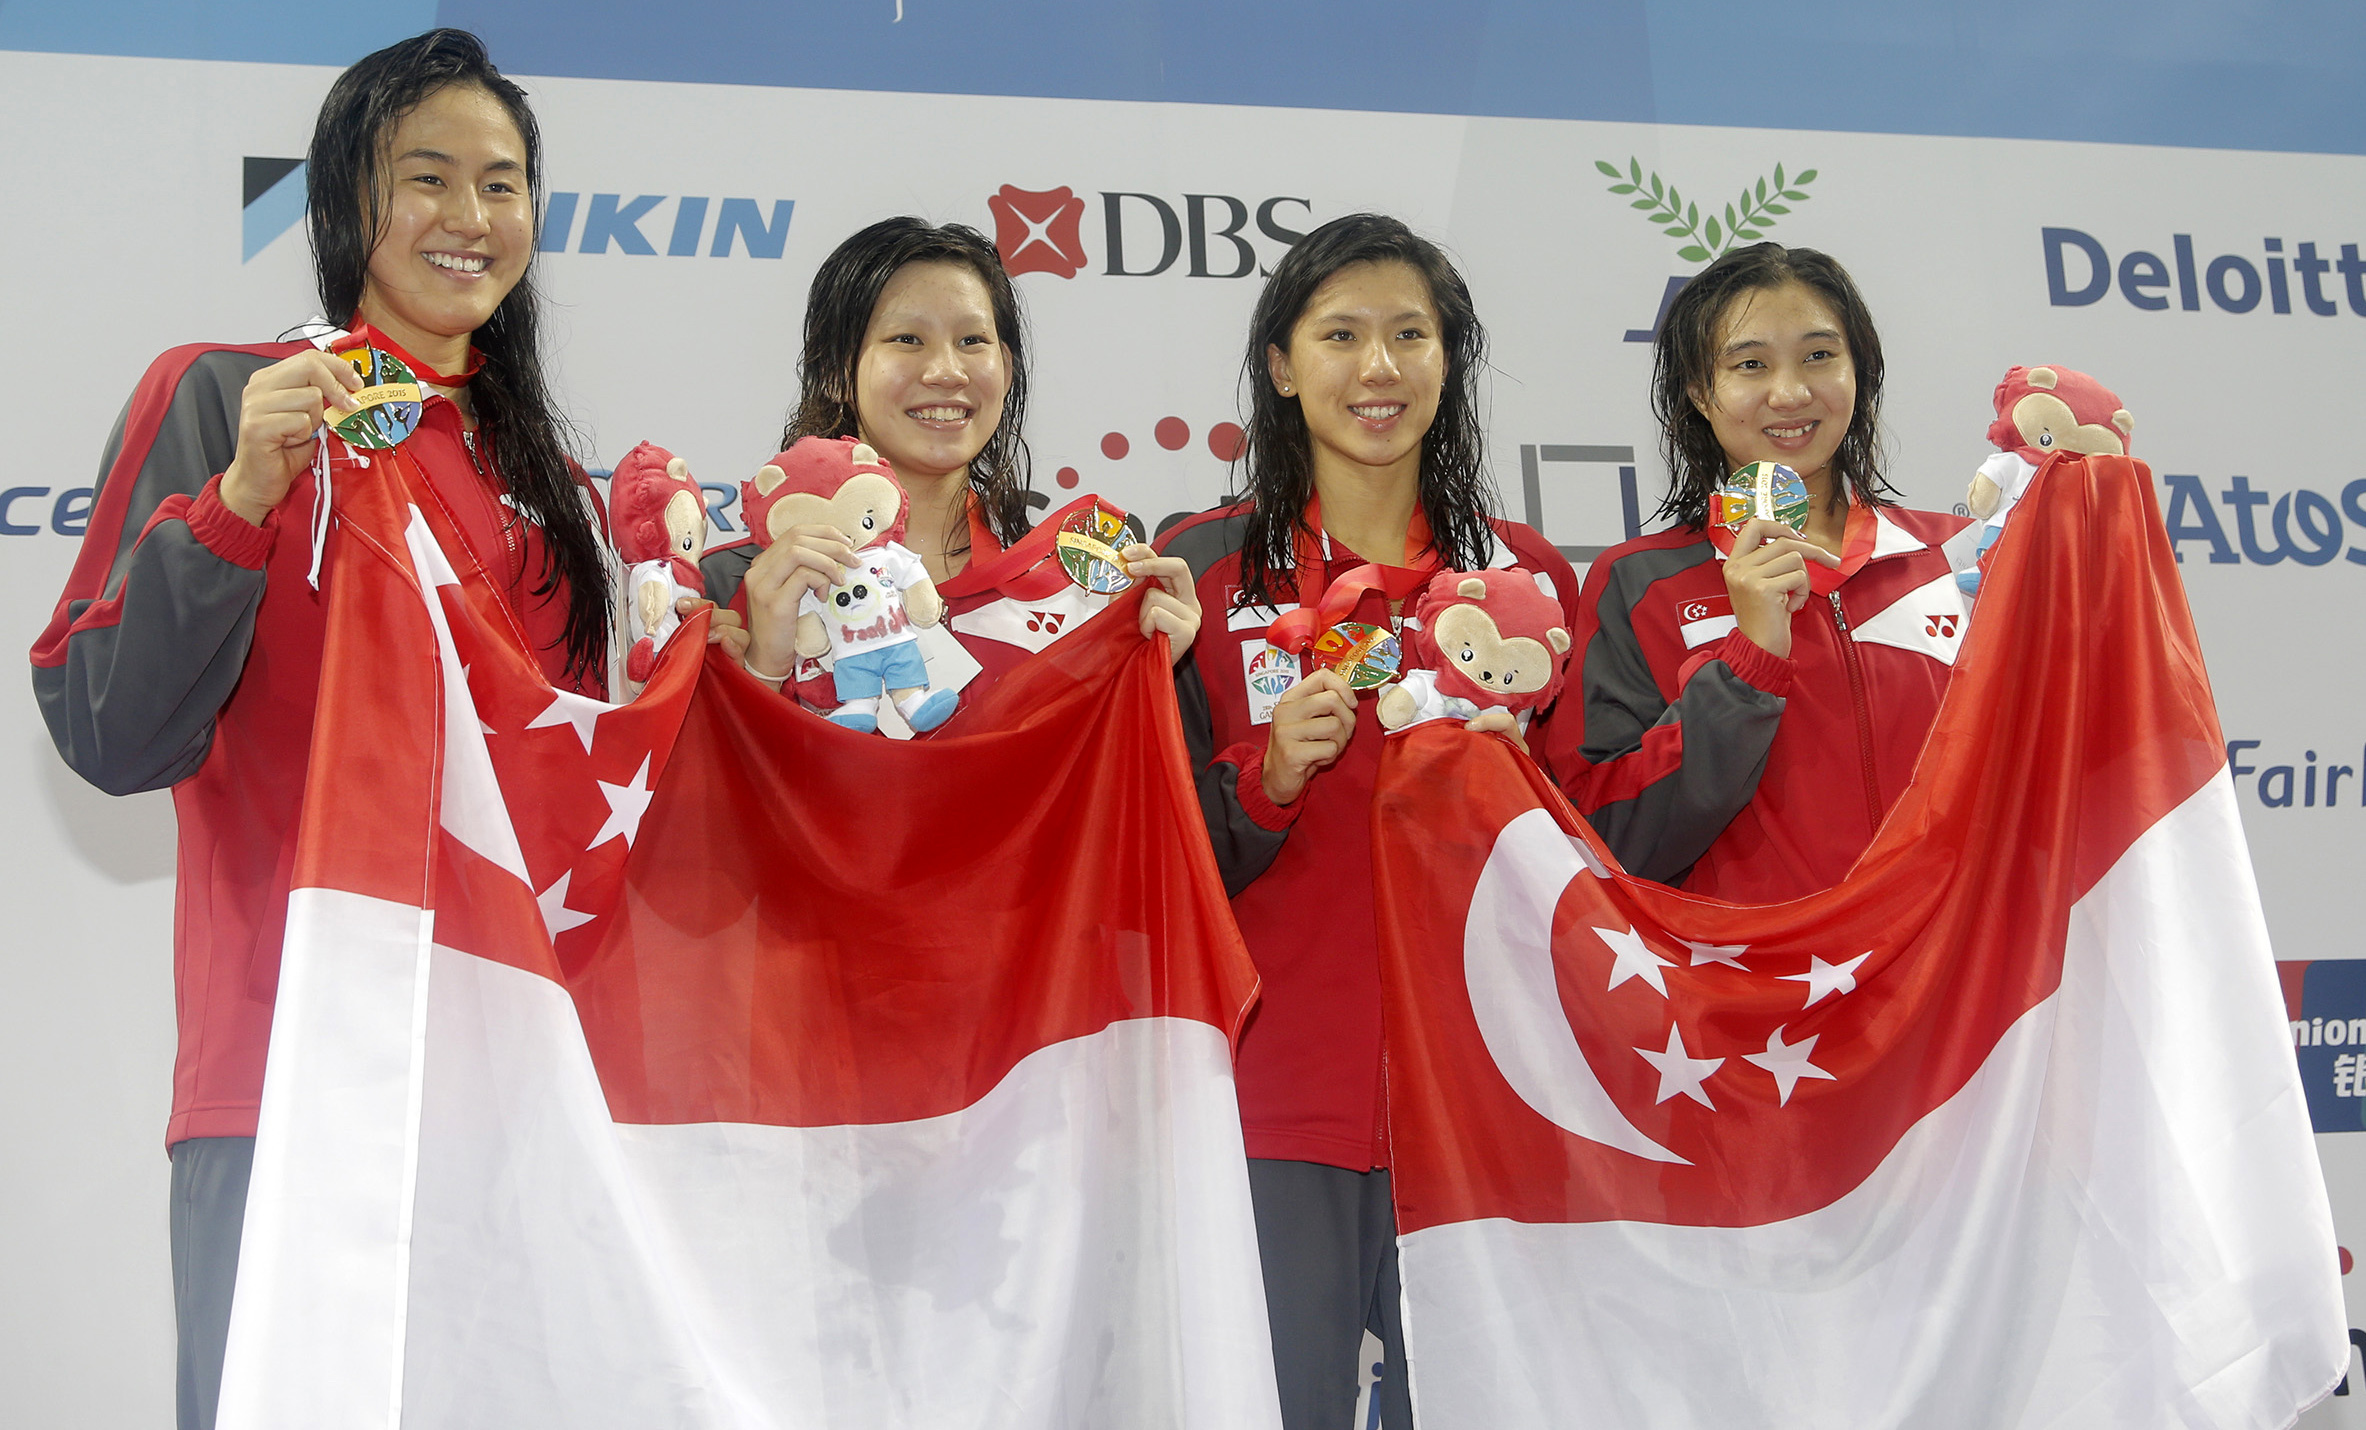 28th SEA Games Singapore 2015 - OCBC Aquatic Centre,  Singapore - 6/6/15  Swimming - Women's 4x100m Freestyle Relay - Final -  The Singapore team celebrates winning SEAGAMES28 TEAMSINGAPORE Mandatory Credit: Singapore SEA Games Organising Committee / Action Images via Reuters